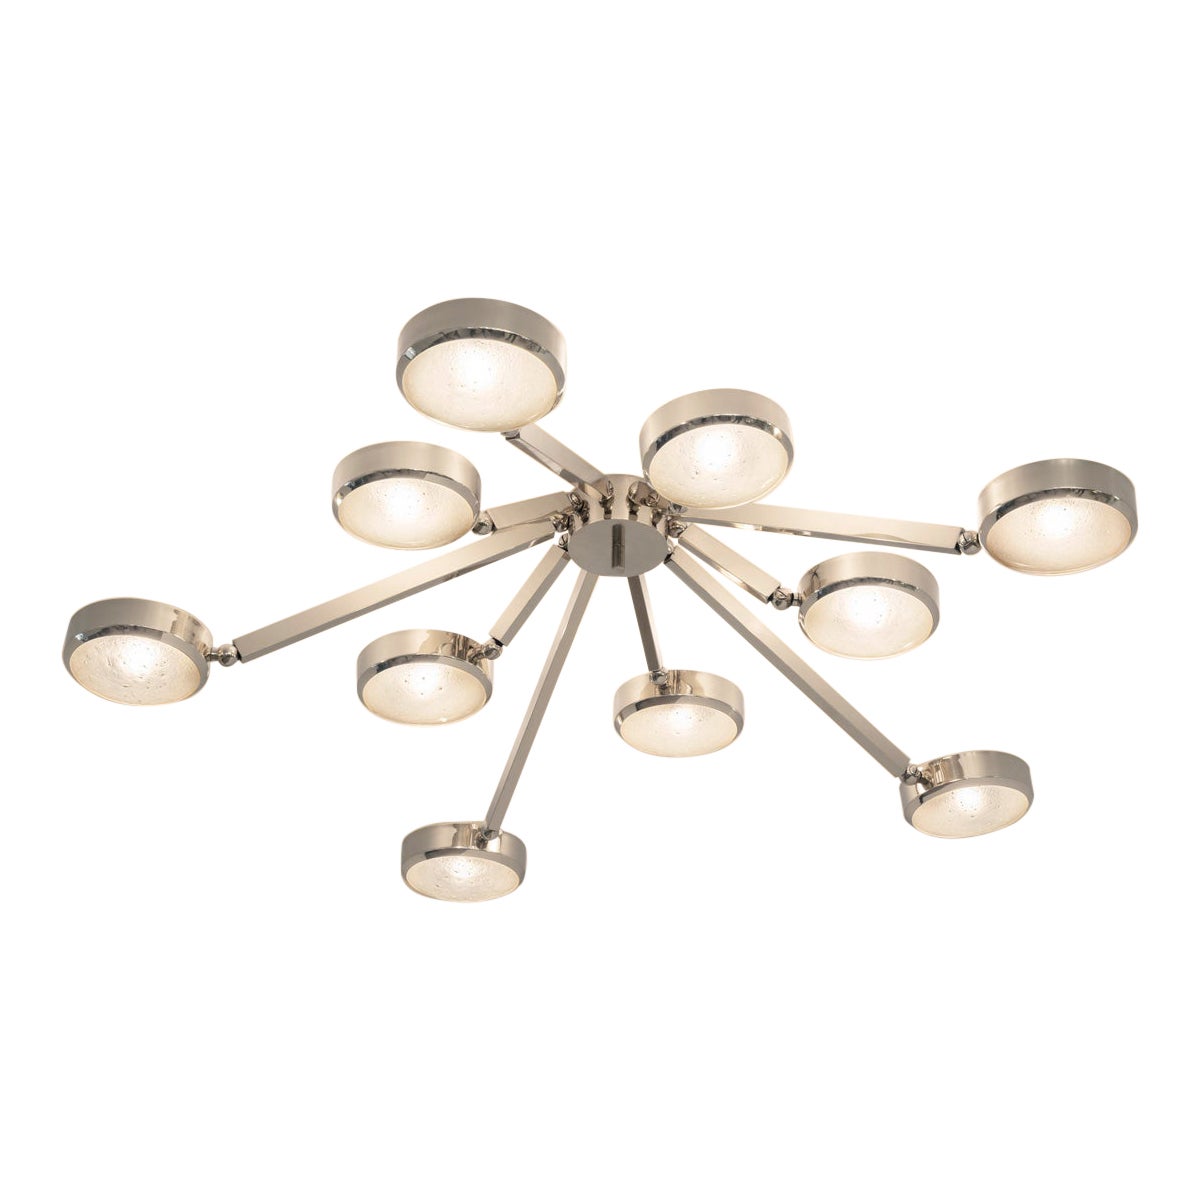 Oculus Ceiling Light by Gaspare Asaro-Murano Glass and Polished Nickel Finish For Sale